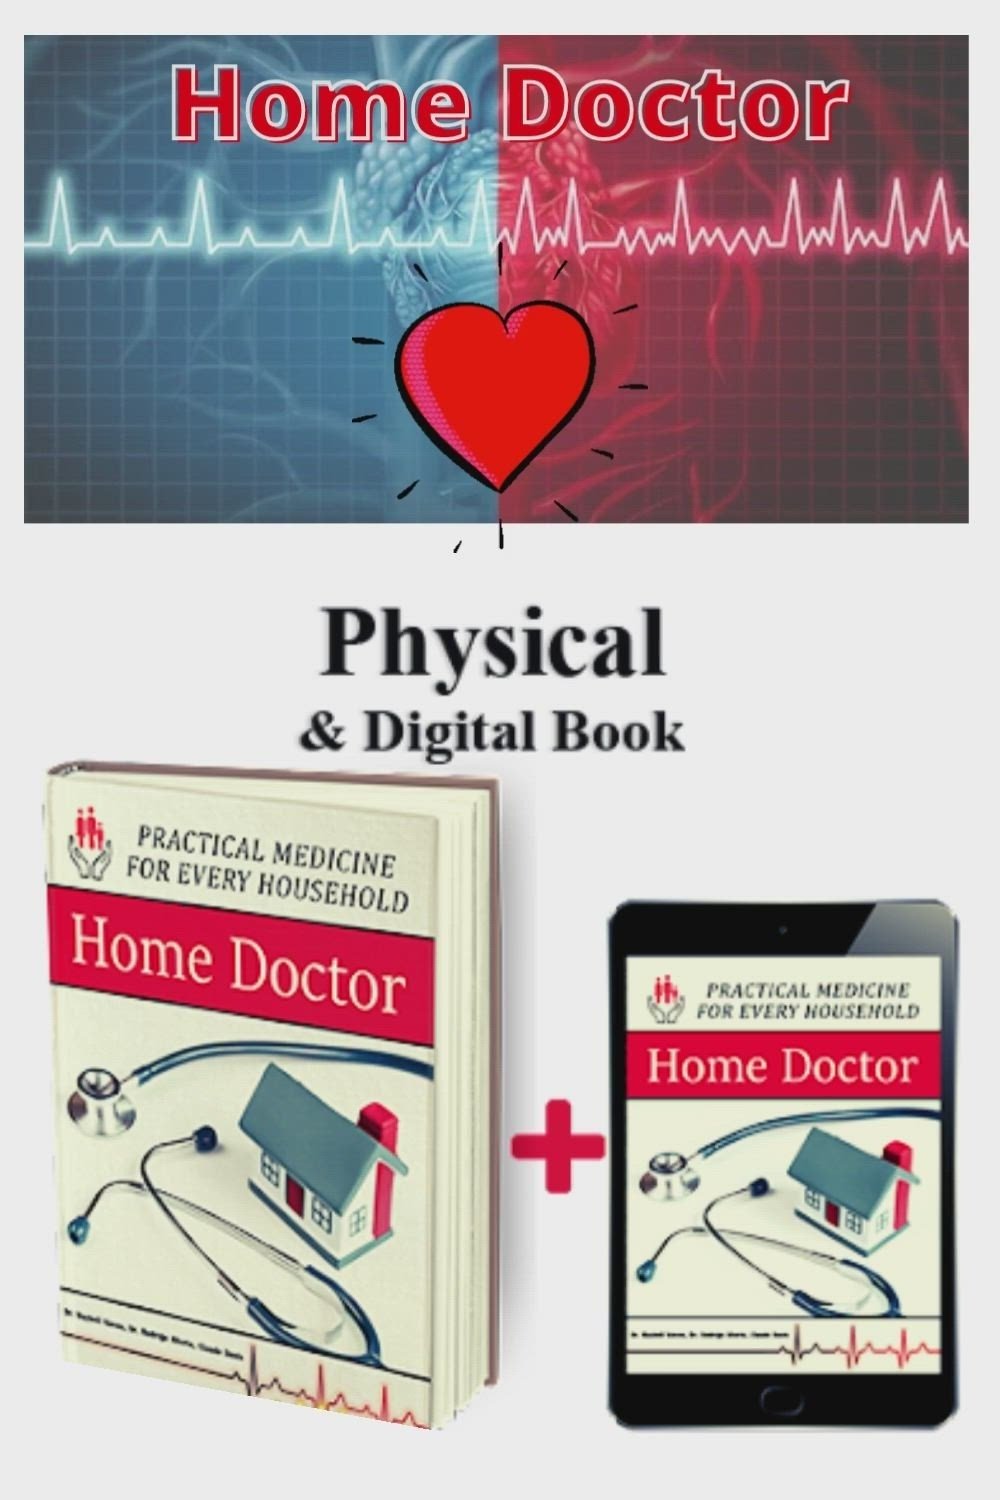 home doctor physical and digital book copy 